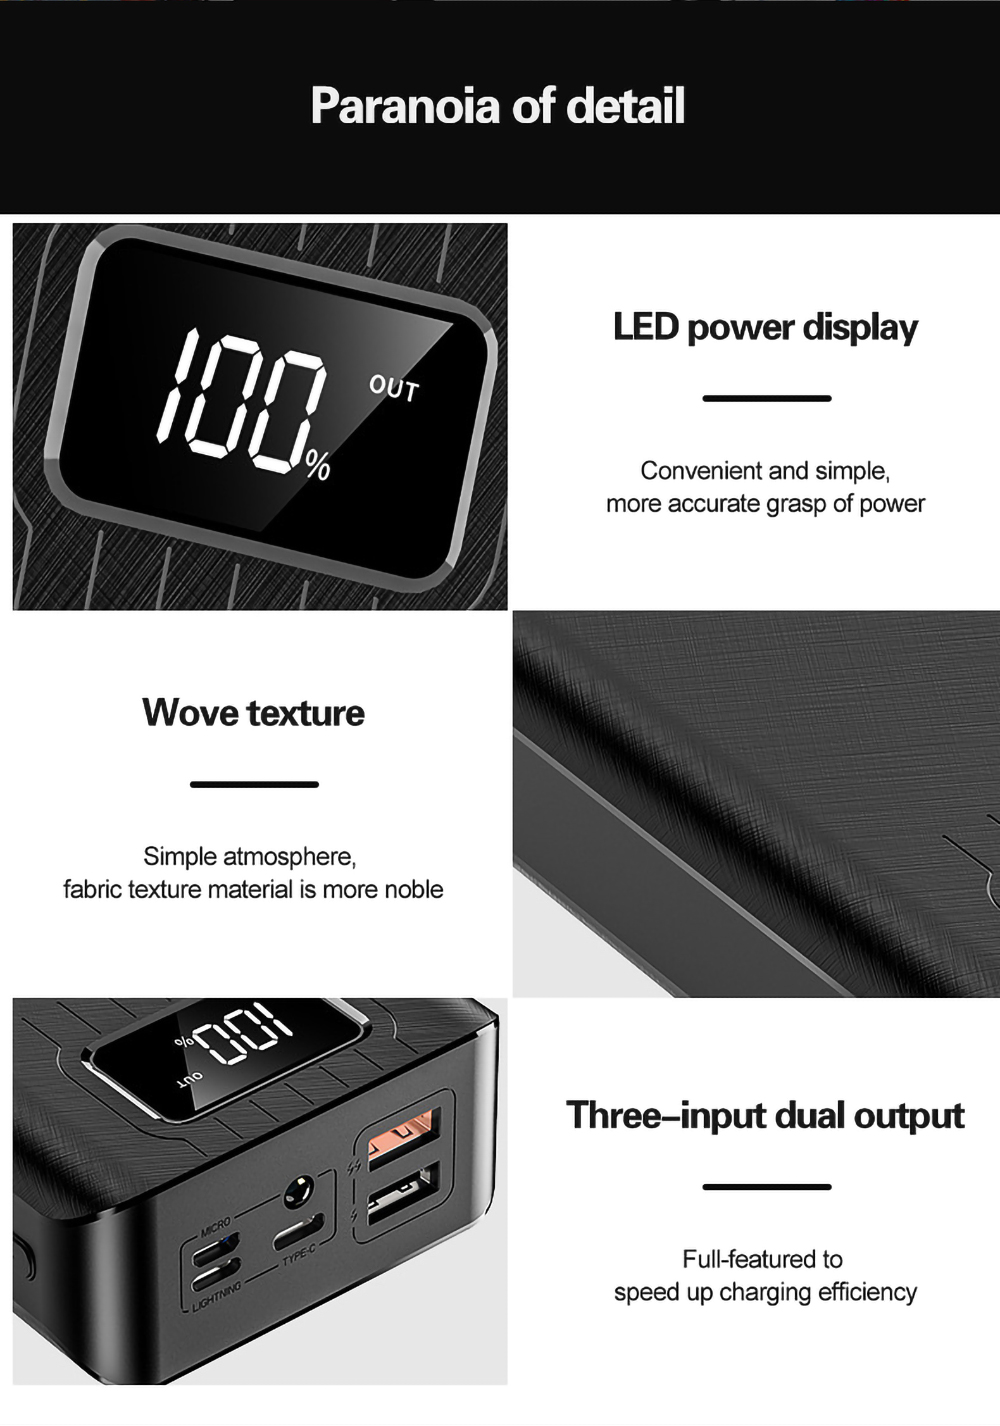 Bakeey-30000mAh-DIY-Power-Bank-Case-LED-Flash-Light-Fast-Charging-For-iPhone-XS-11Pro-Huawei-P40-Pro-1725265-13